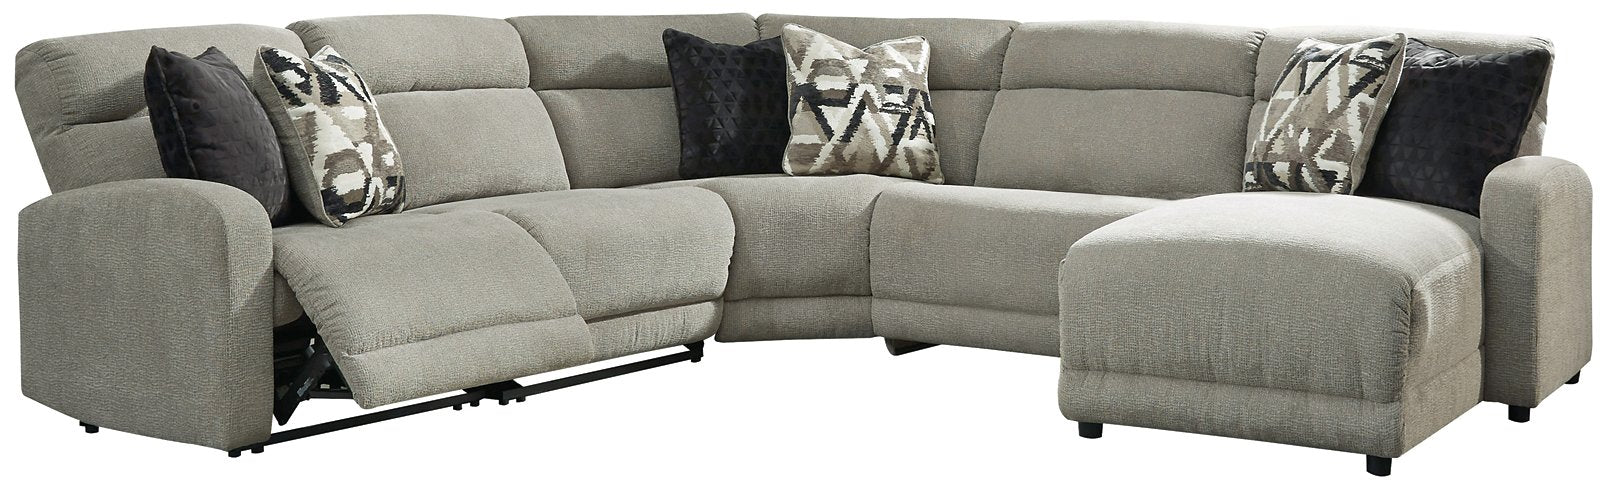 Colleyville Power Reclining Sectional - Hometown Comfort Station